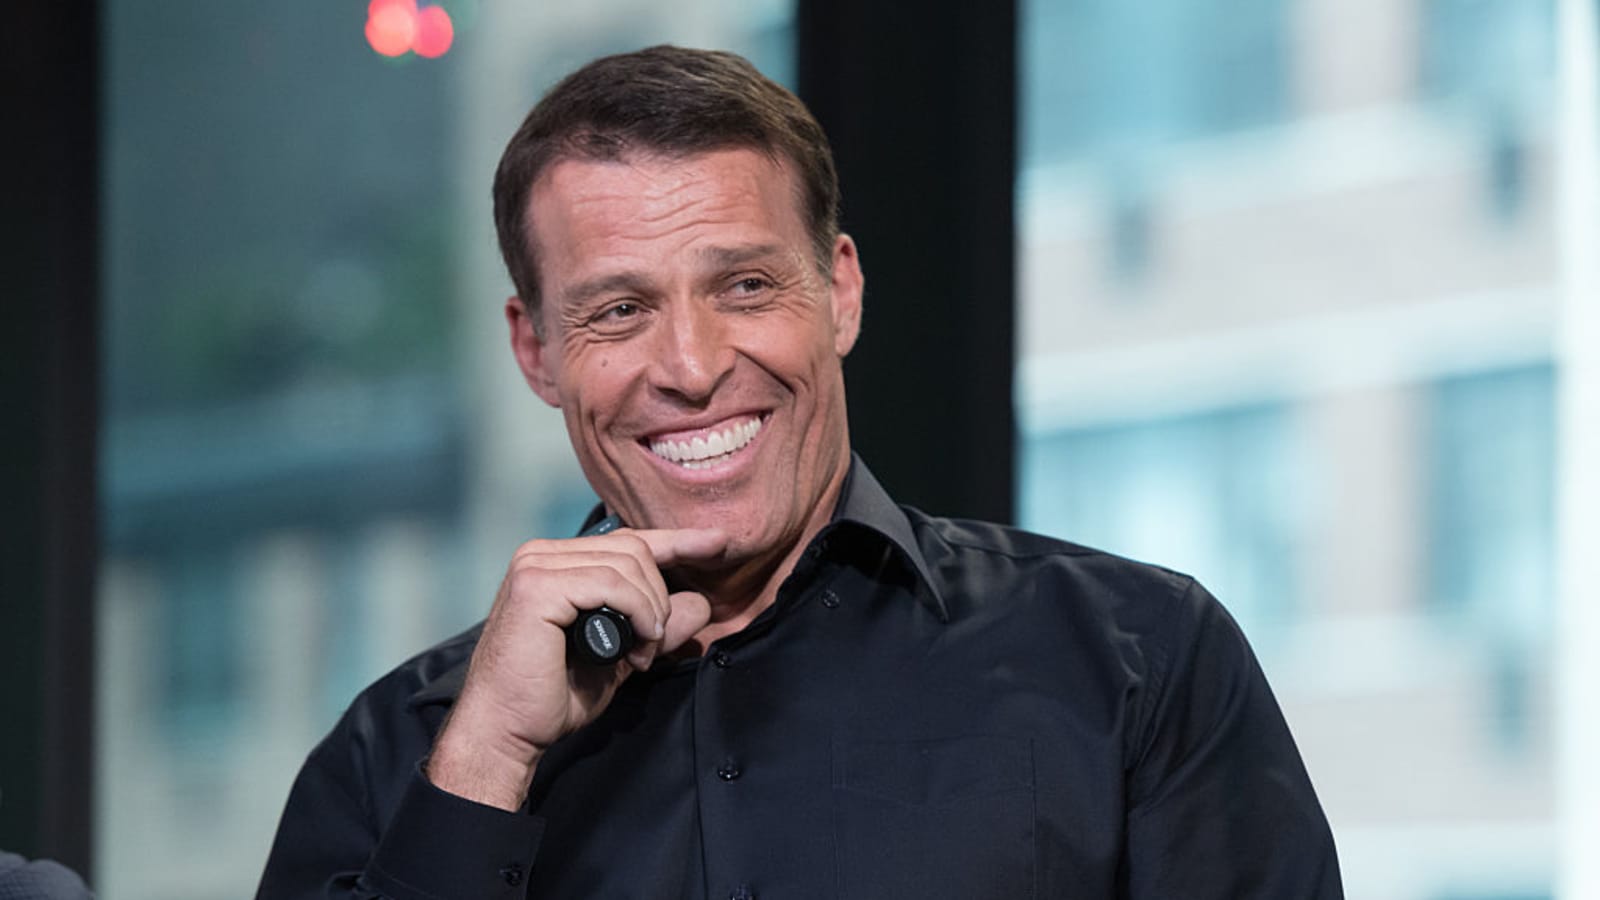 Tony Robbins shares the advice he would give his 21-year-old self